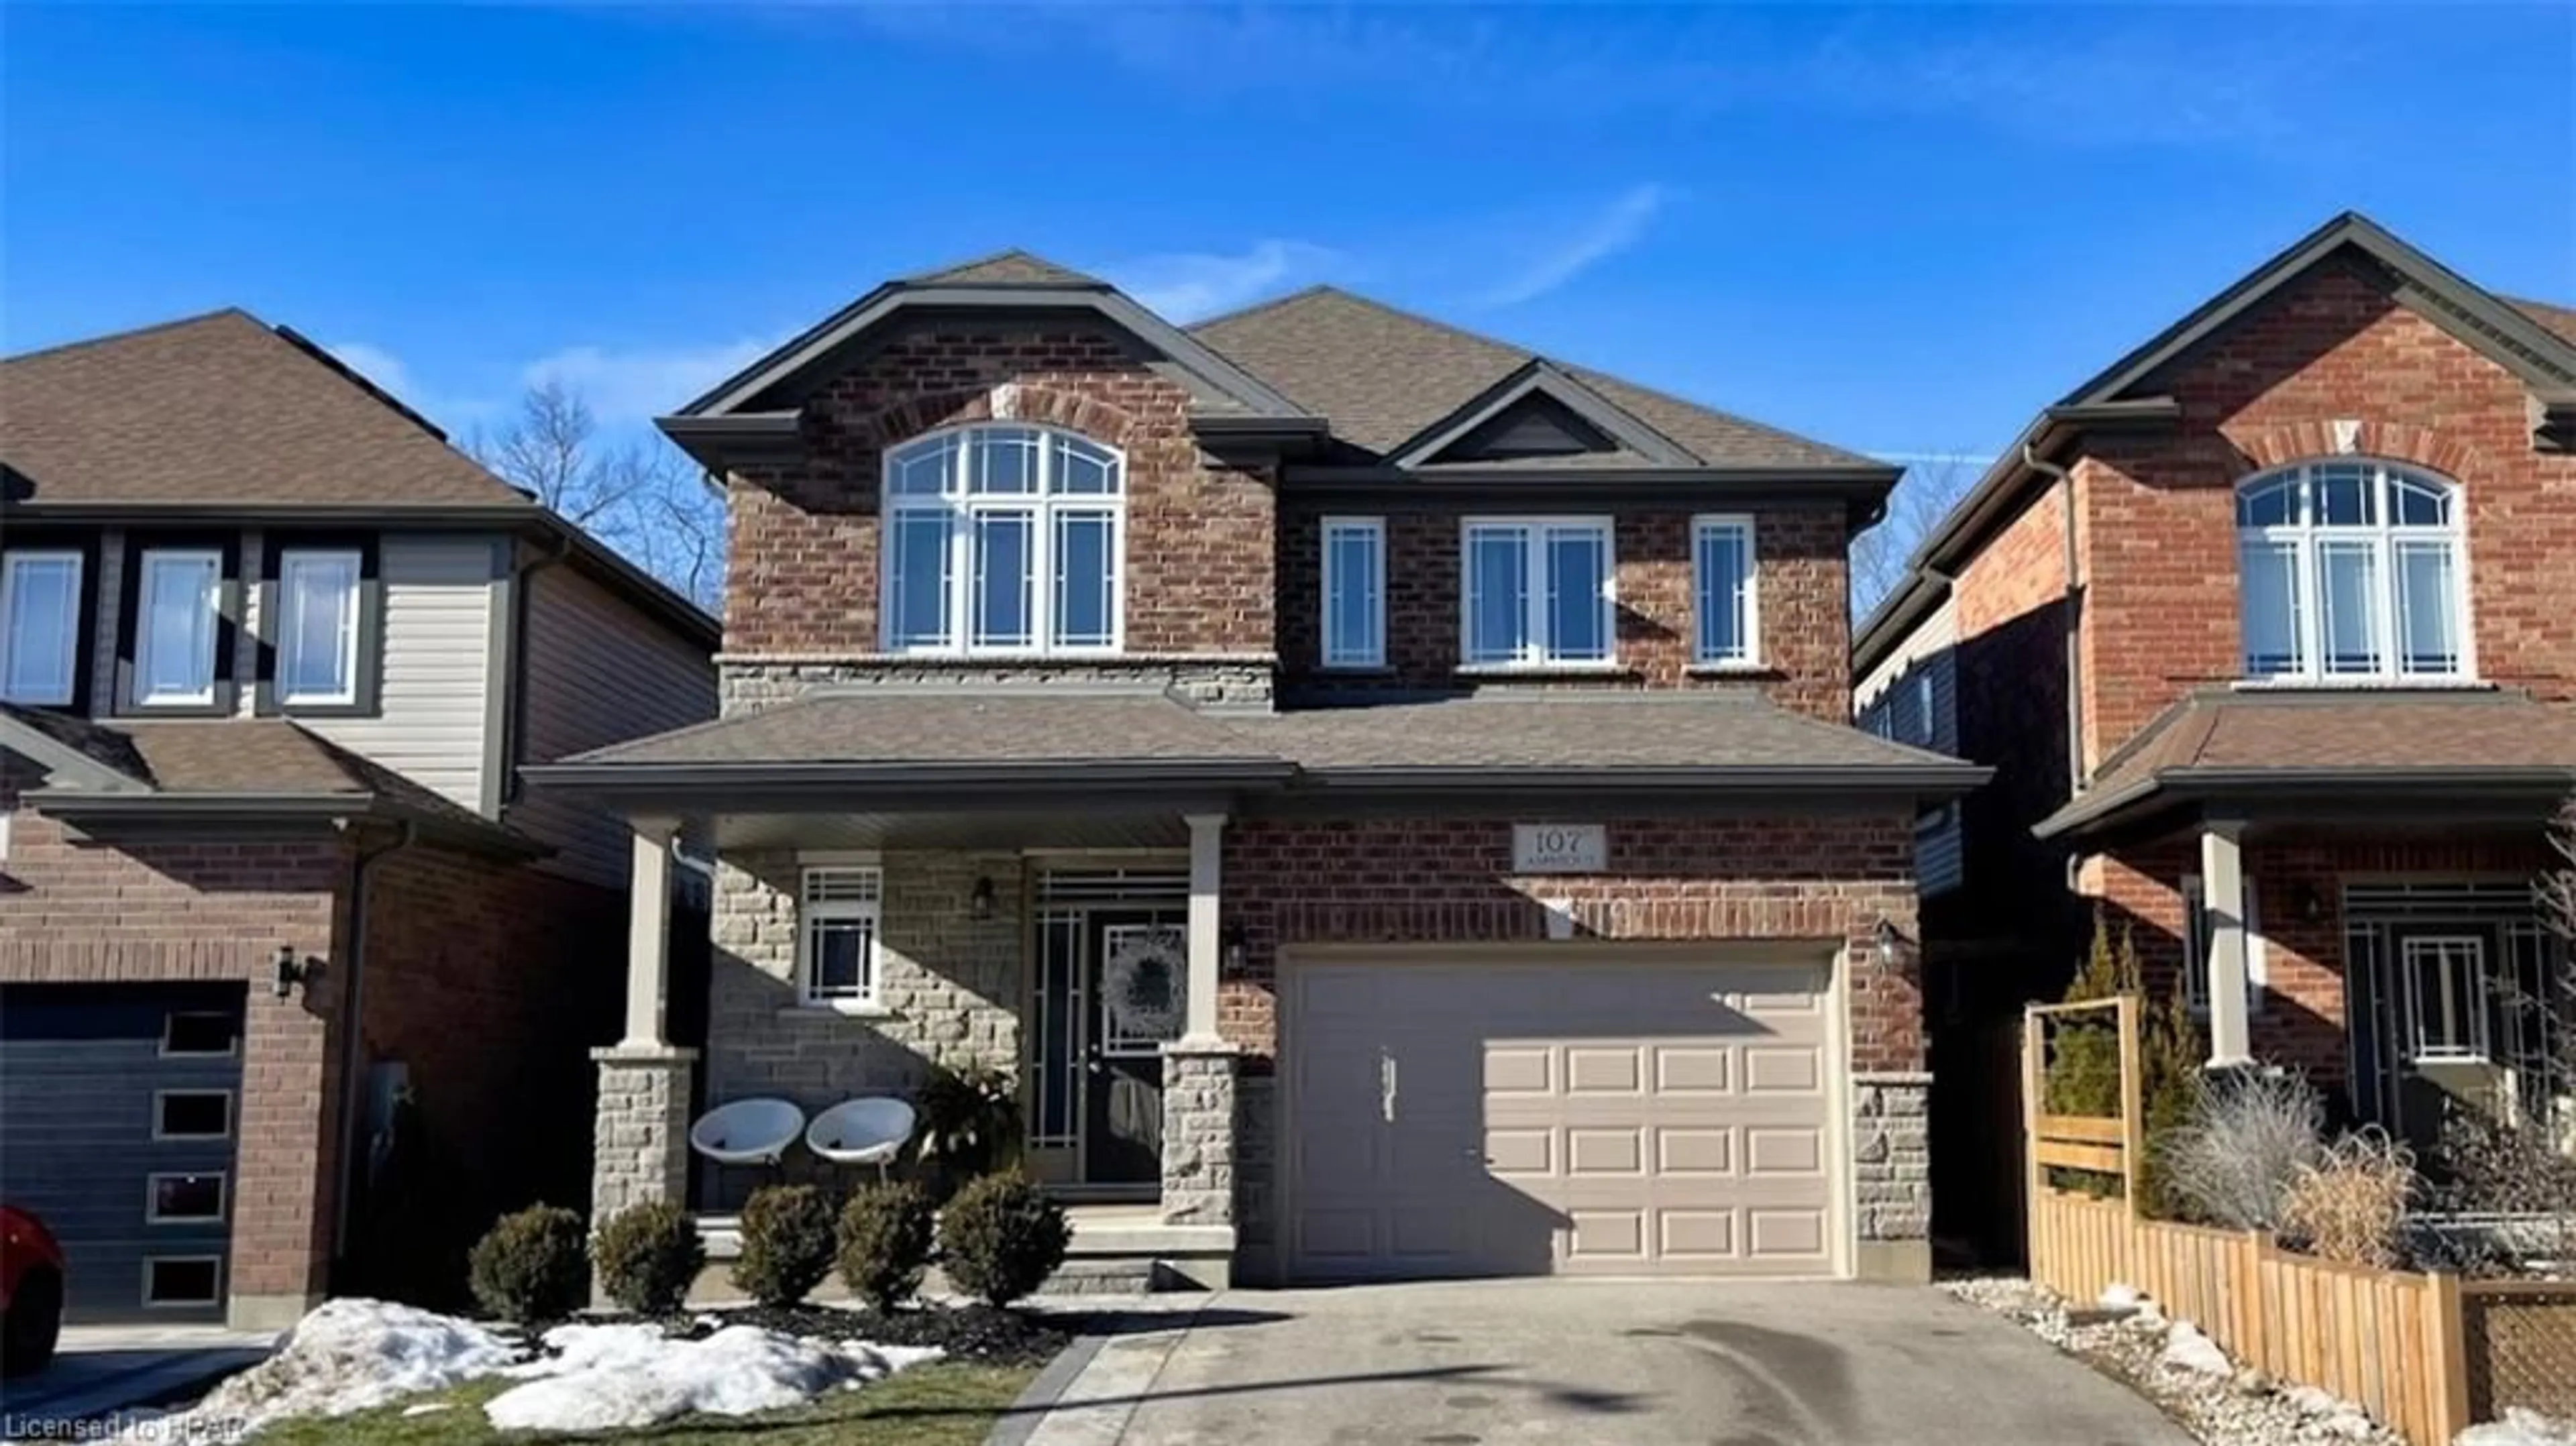 Home with brick exterior material for 107 Ambrous Cres, Guelph Ontario N1G 0E4